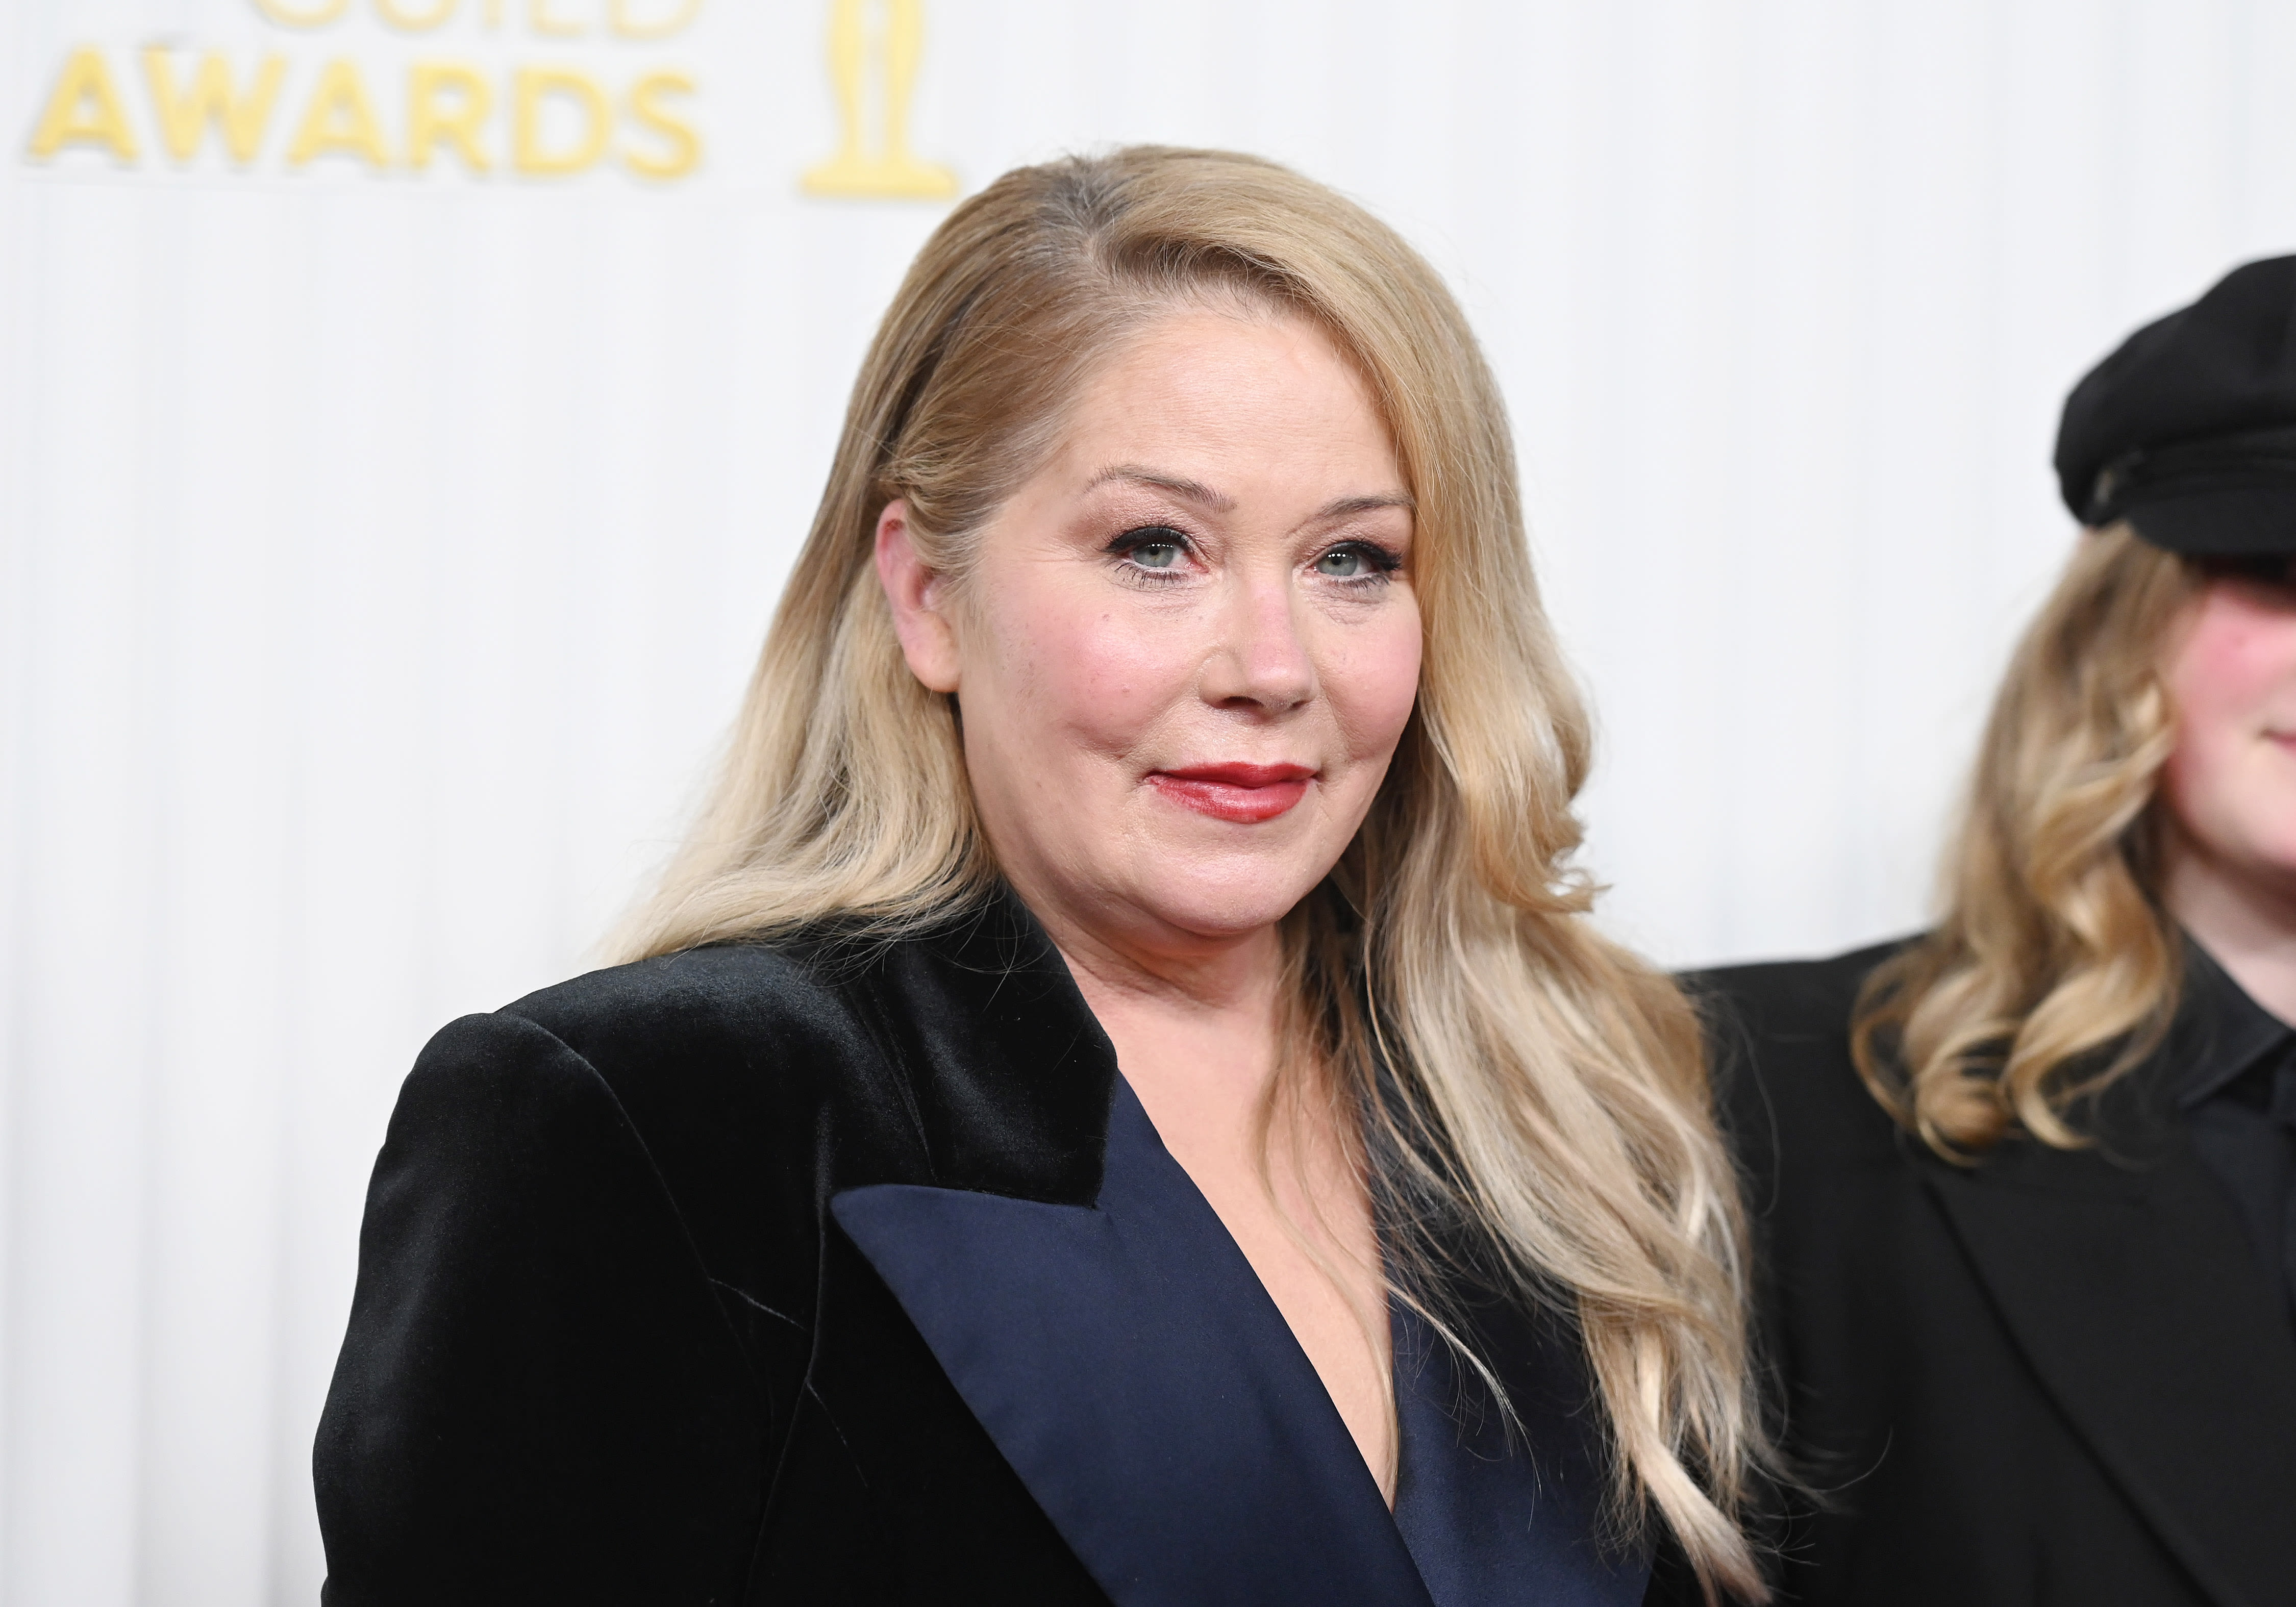 Christina Applegate says she got sapovirus after eating a contaminated salad. Here's what that is — and how to avoid it.